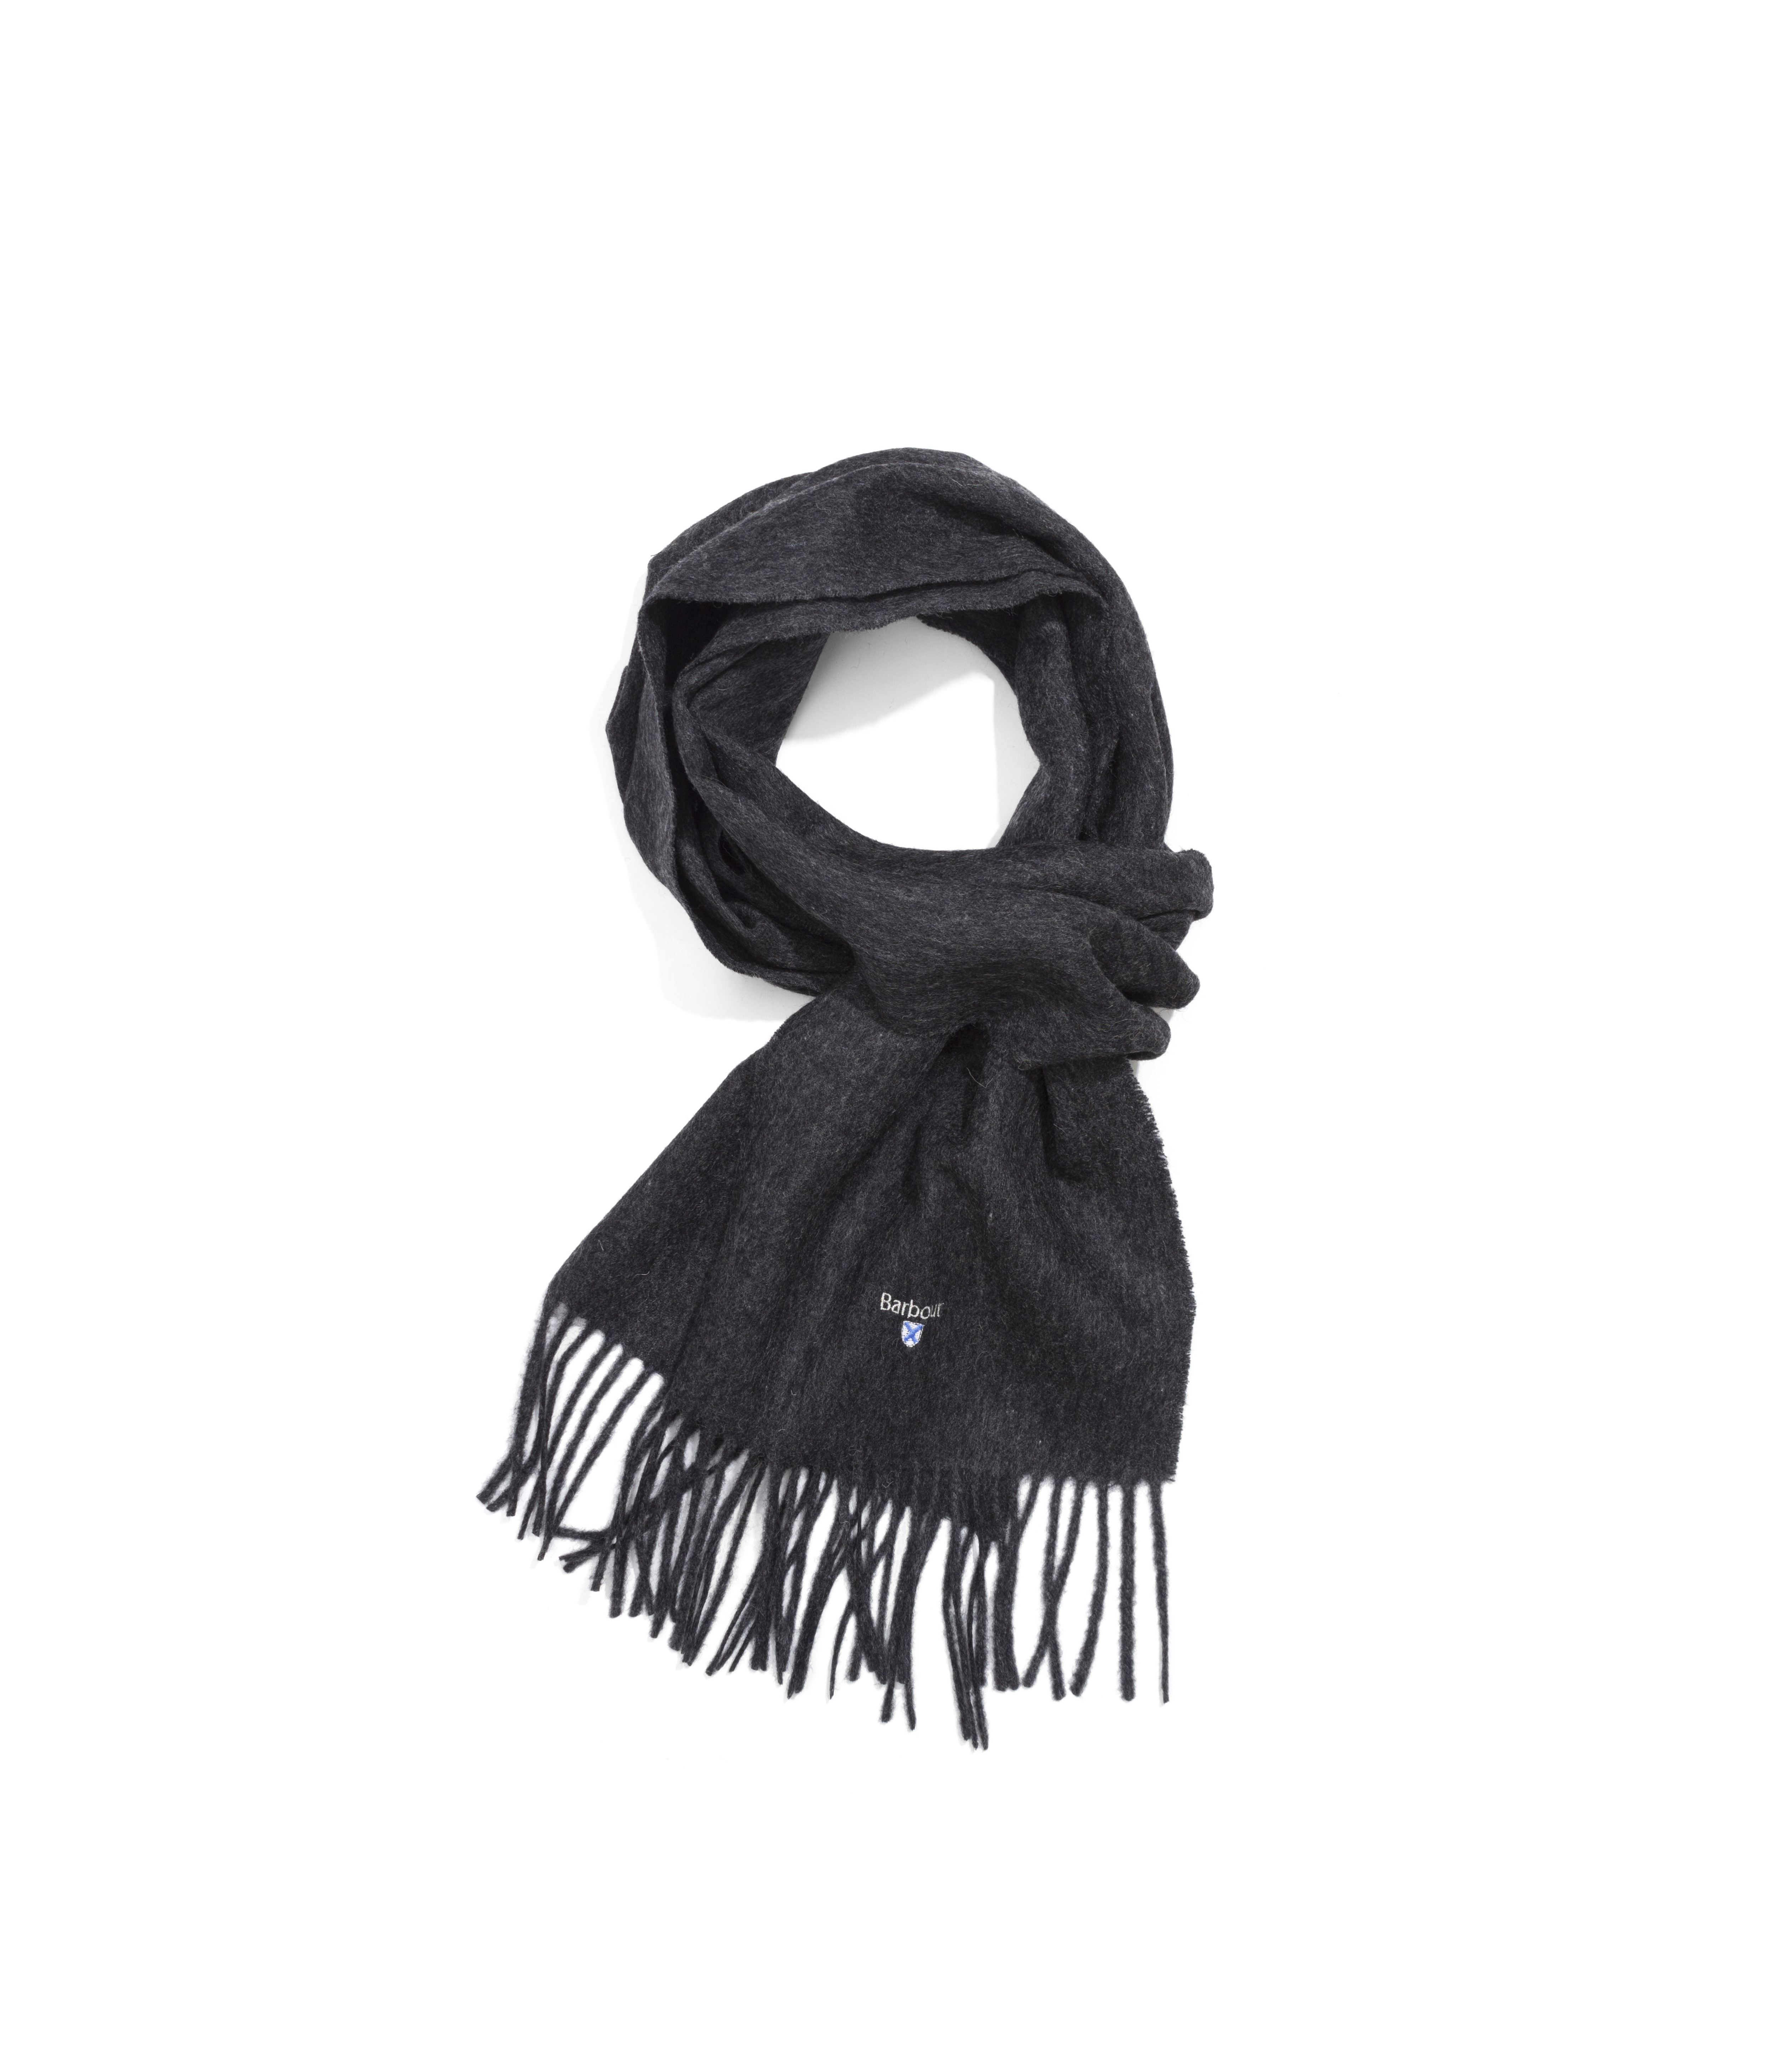 Shop Barbour Plain Lambswool Scarf Charcoal/Grey at itk online store